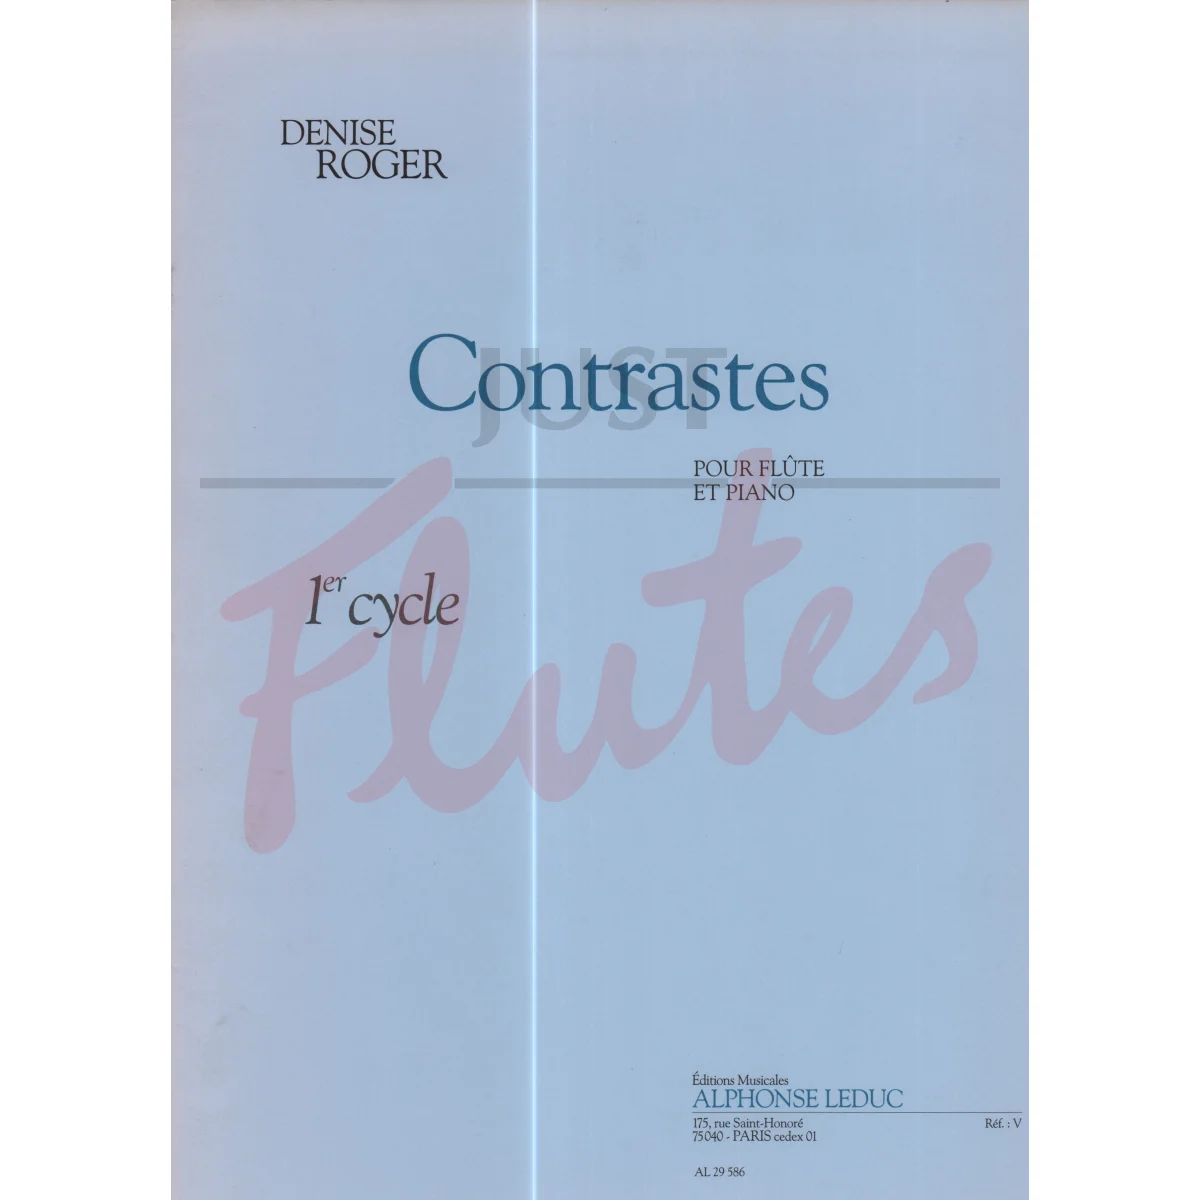 Contrastes for Flute and Piano